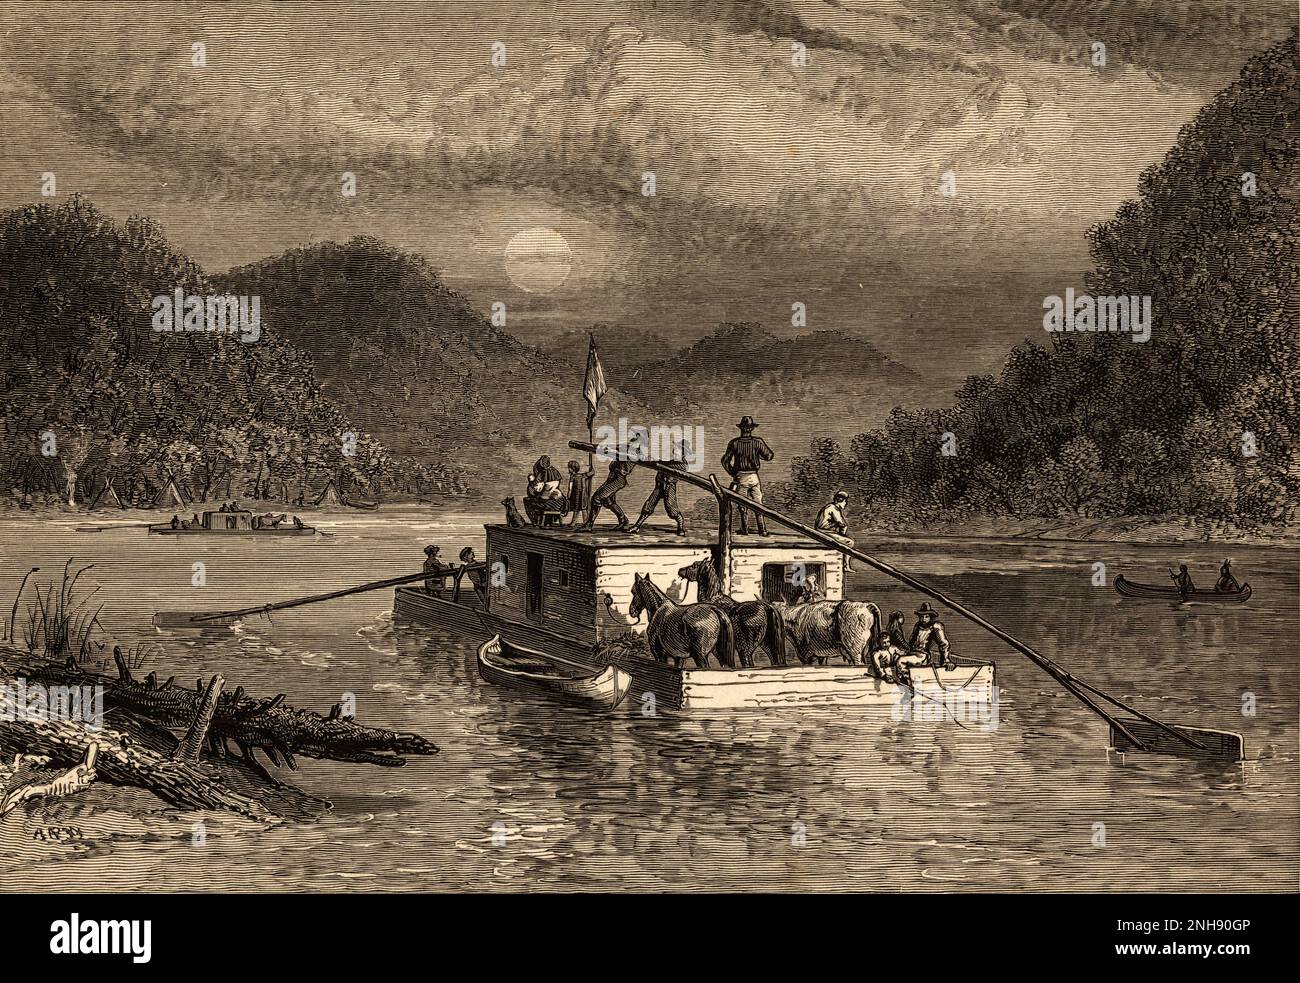 A group of immigrants and horses aboard a flatboat as they travel the Tennessee river by moonlight./nWood engraving by Alfred Waud made between 1855-1890. Published in The Century Magazine, 1916. Stock Photo